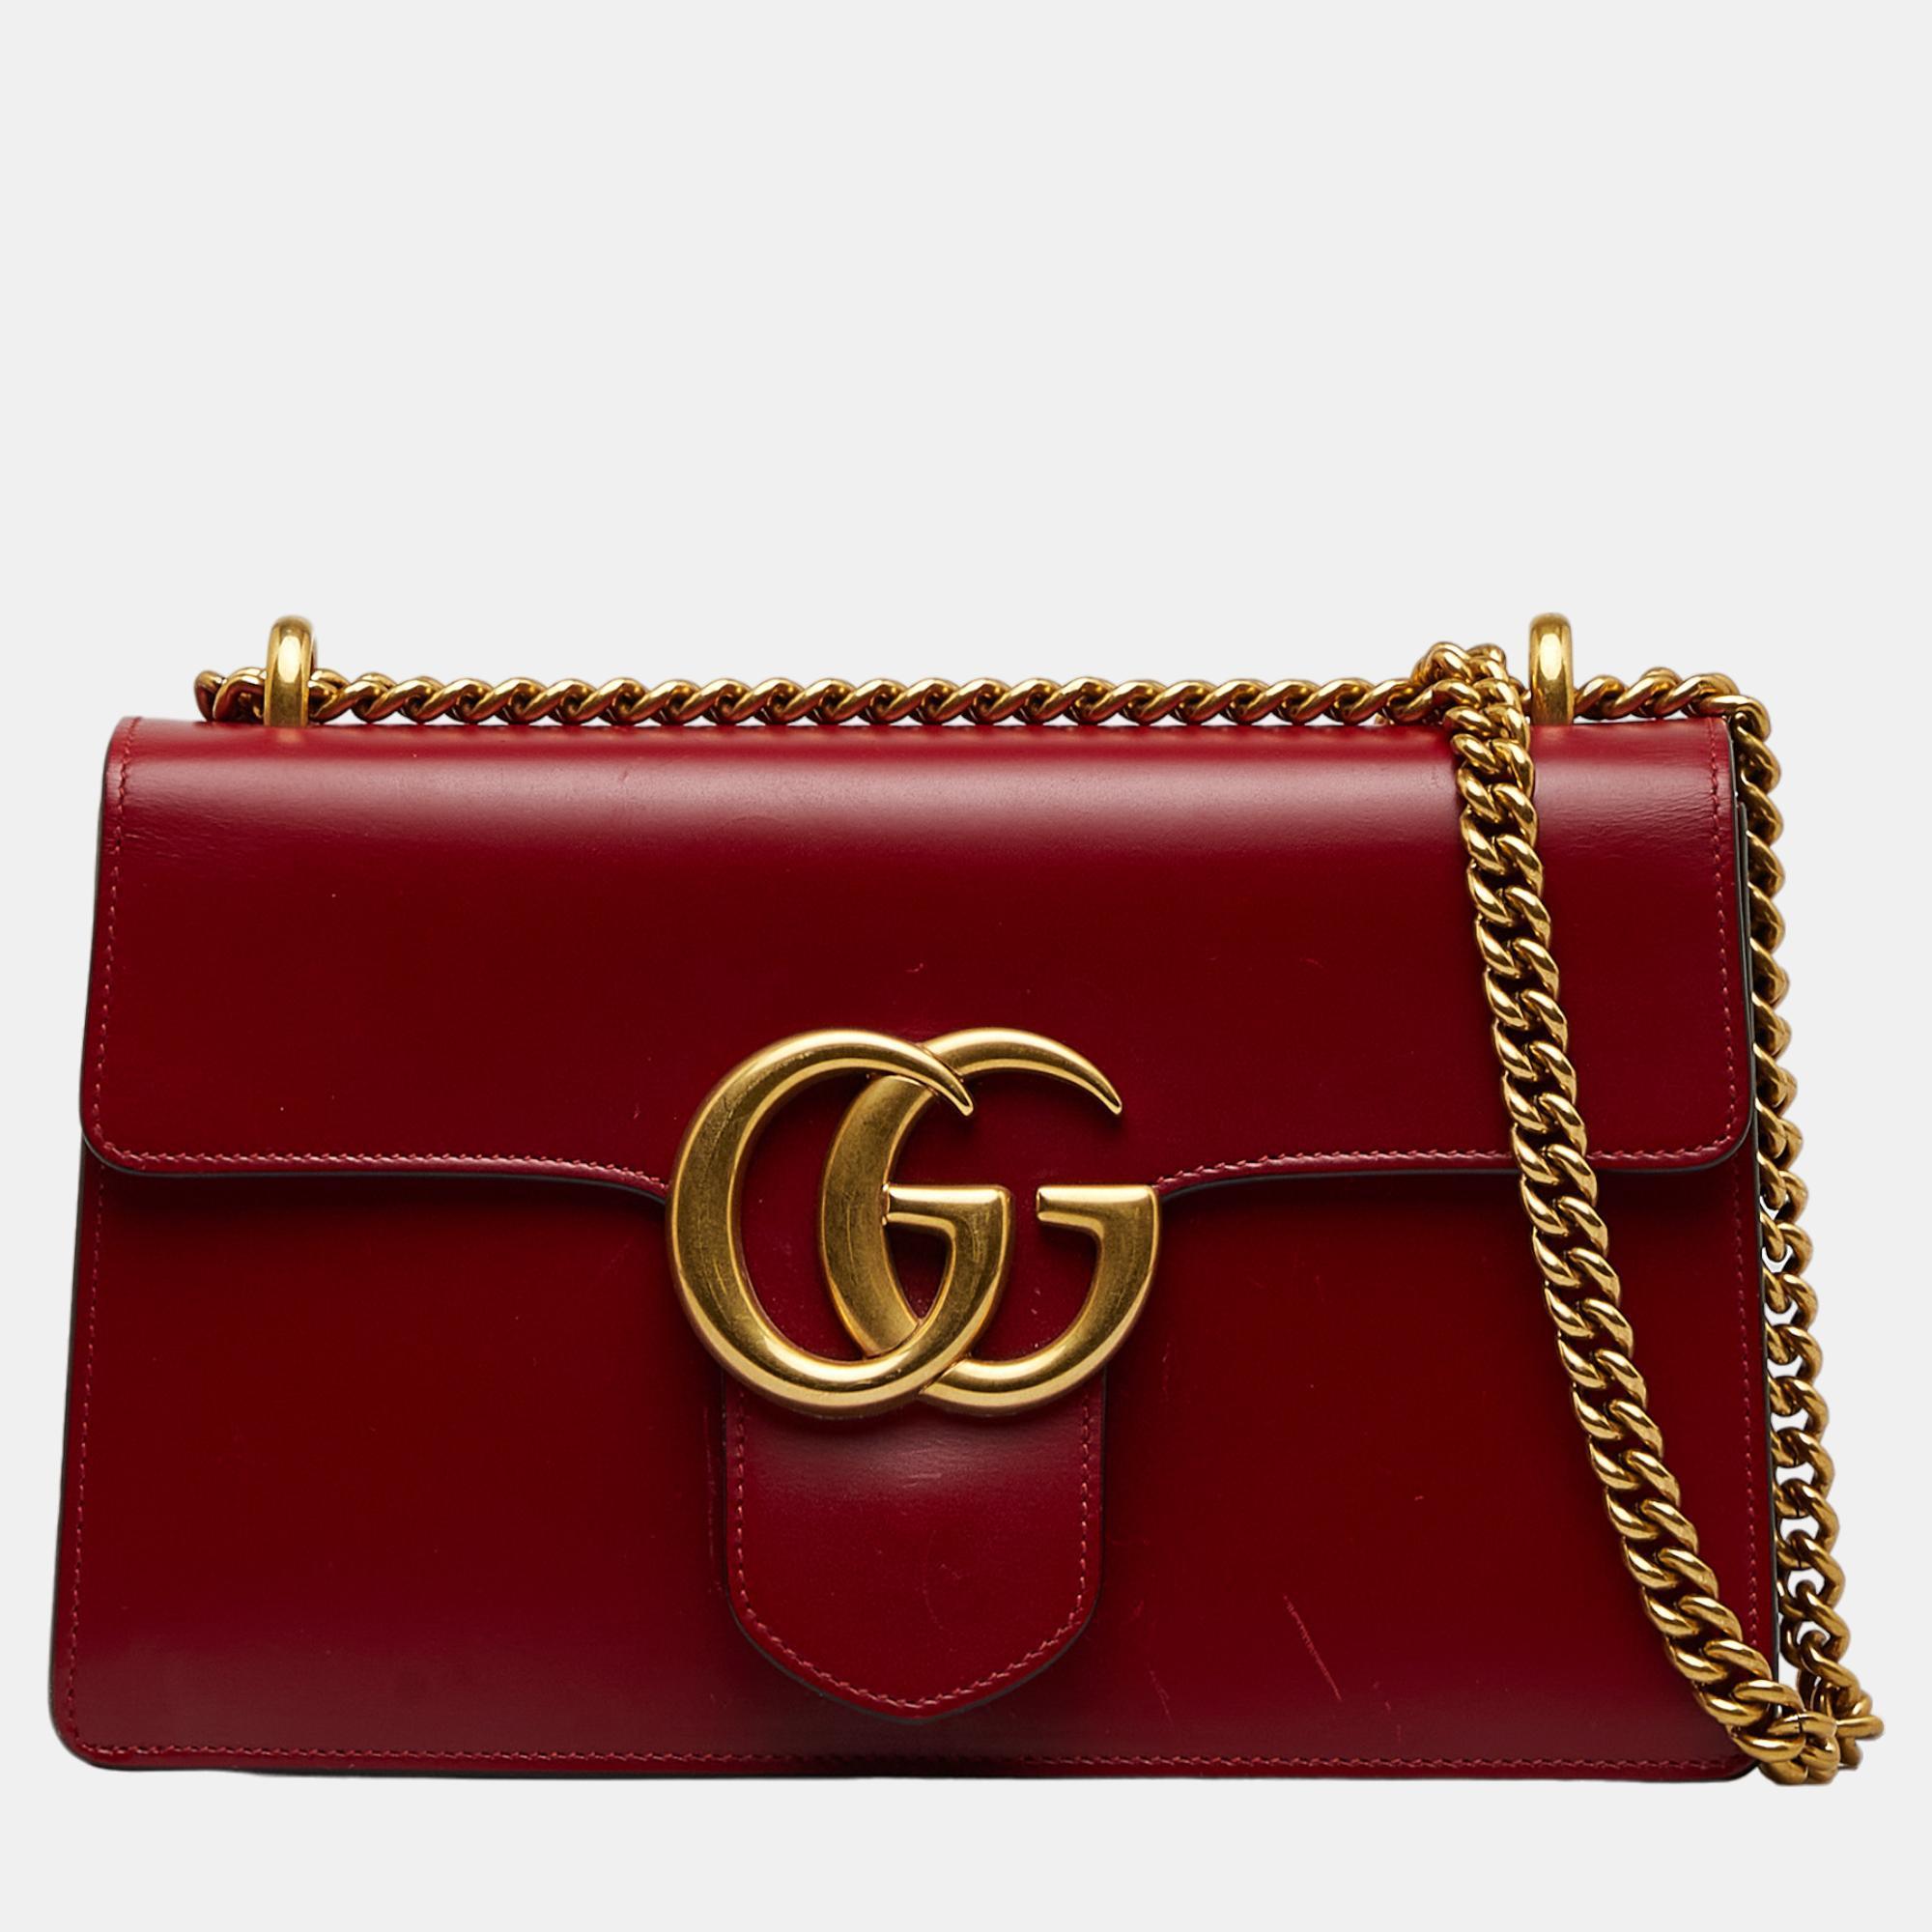 Gucci Red GG Marmont Chain Shoulder Bag